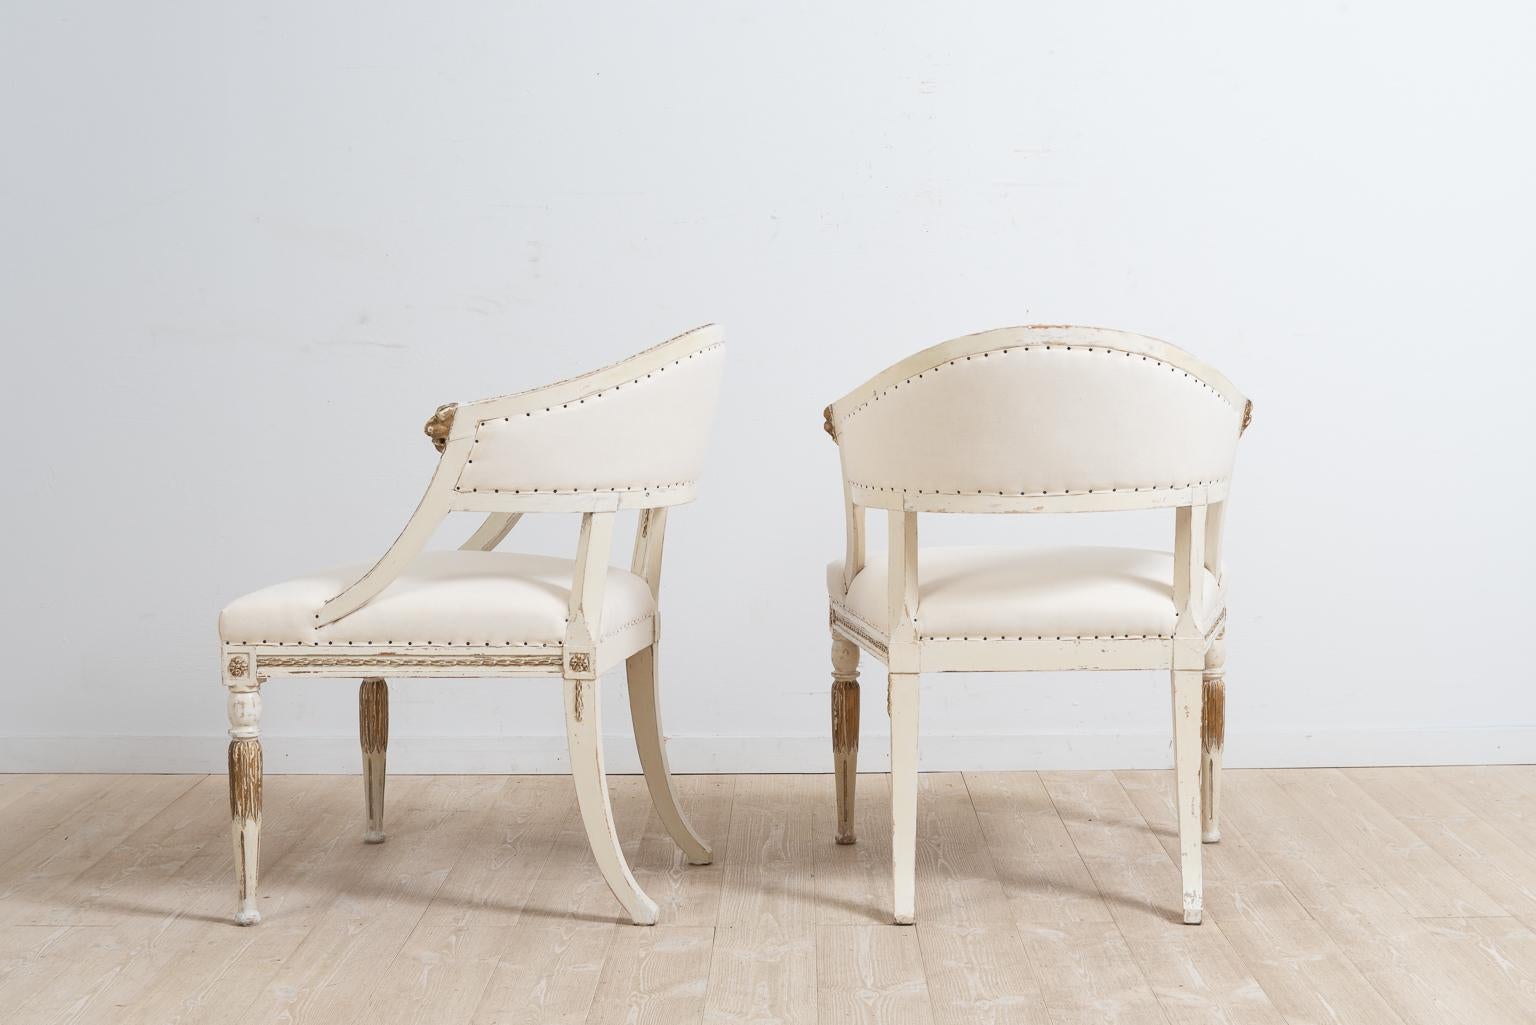 Hand-Crafted Pair of 19th Century Swedish Barrel Back Armchairs